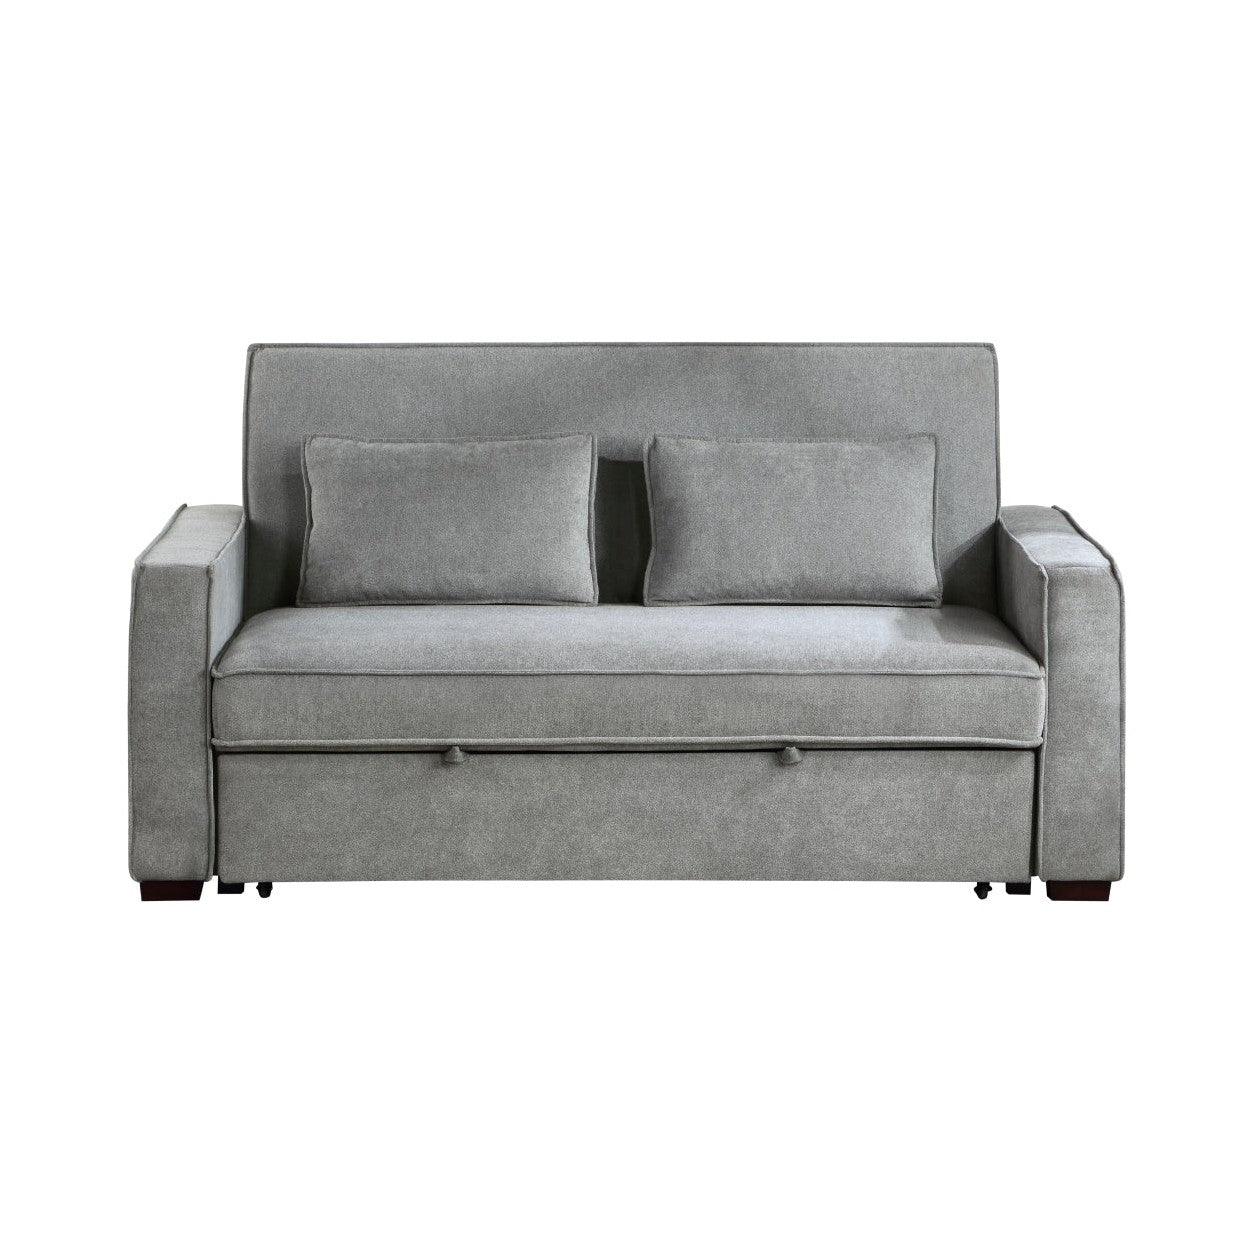 Maximizing Comfort and Functionality: Click Clack Sofa Beds with